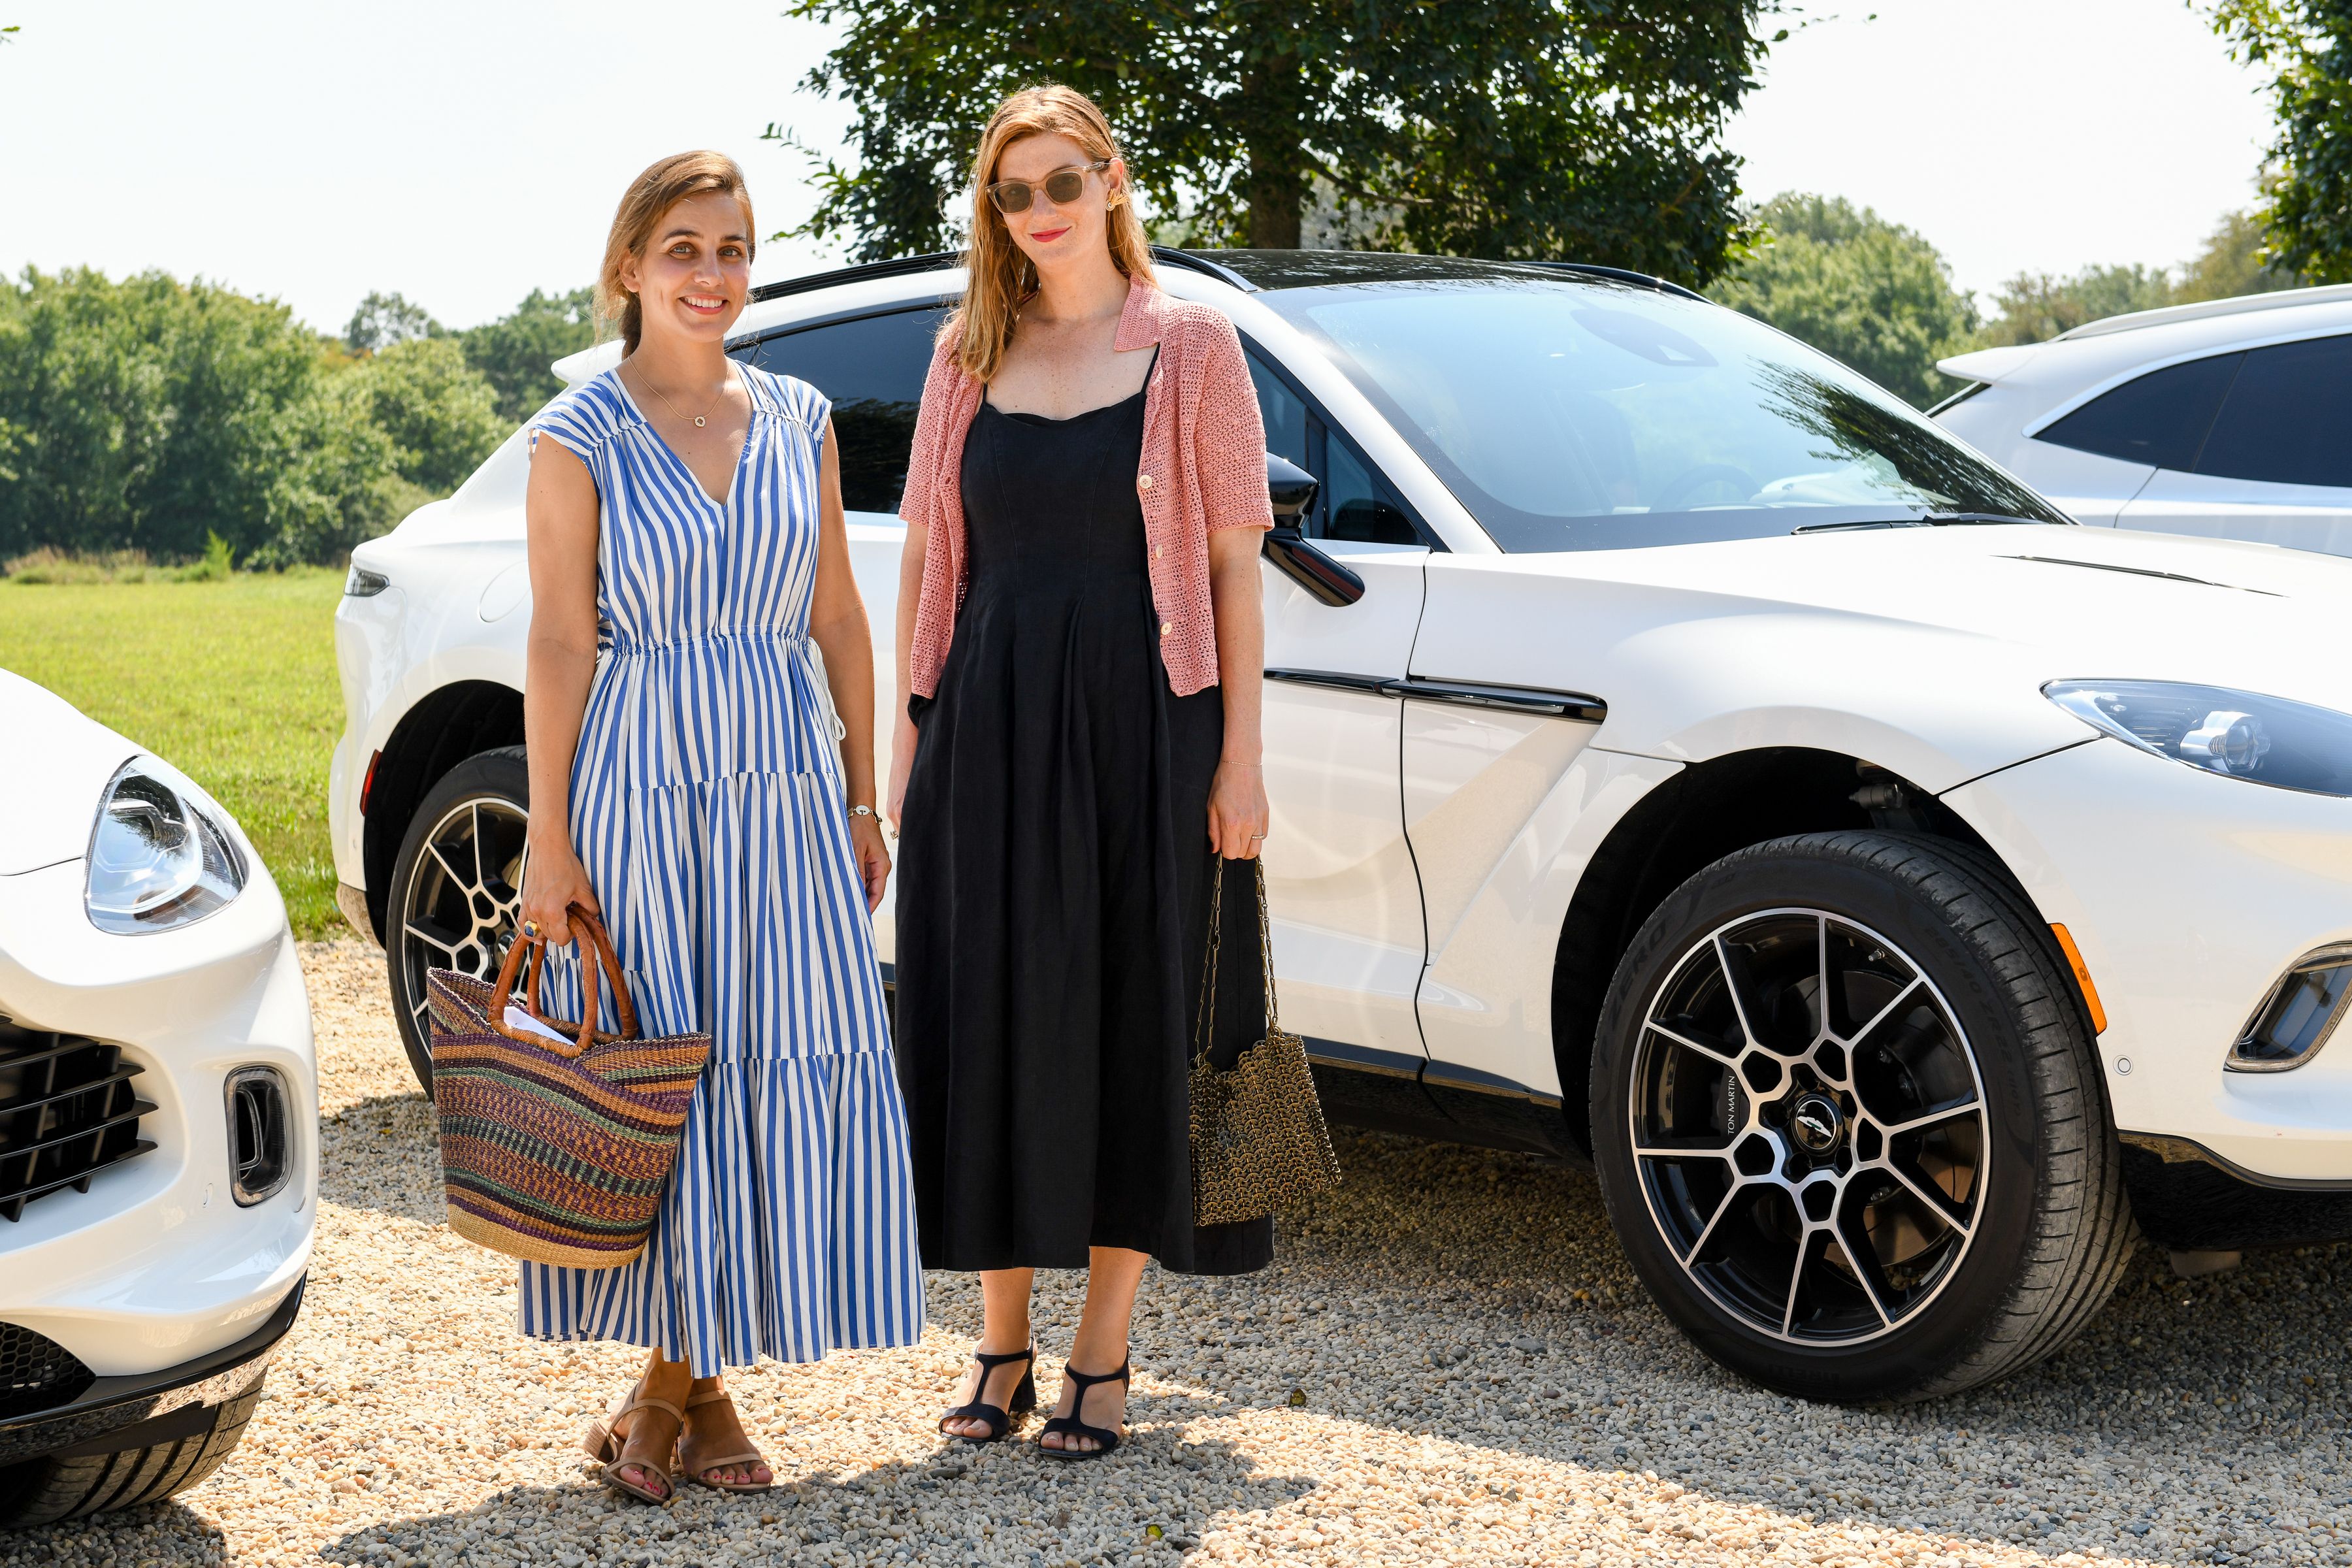 Two women standing in front of a car